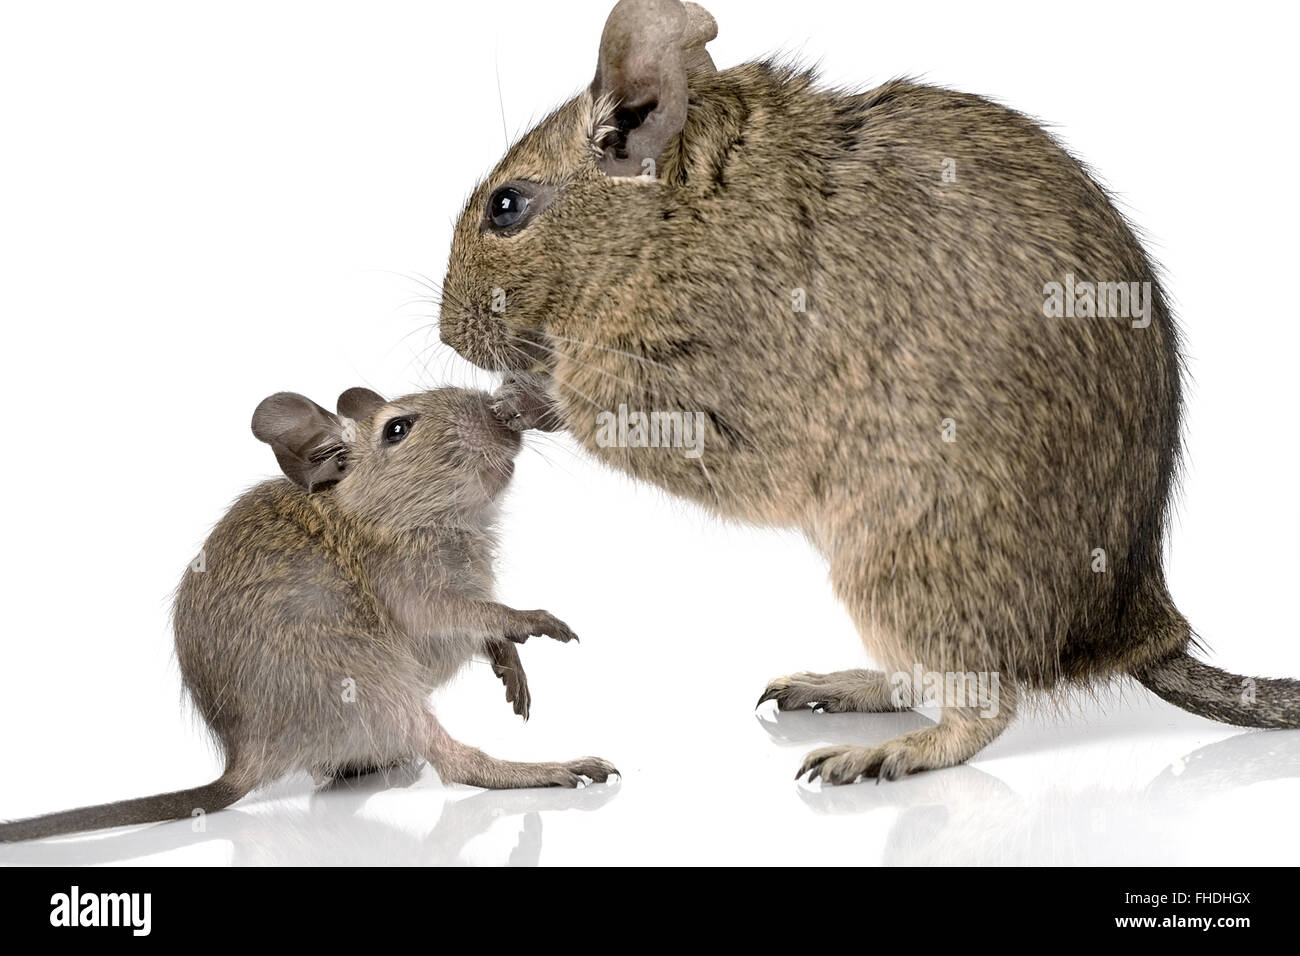 baby rodent mouse with mother Stock Photo